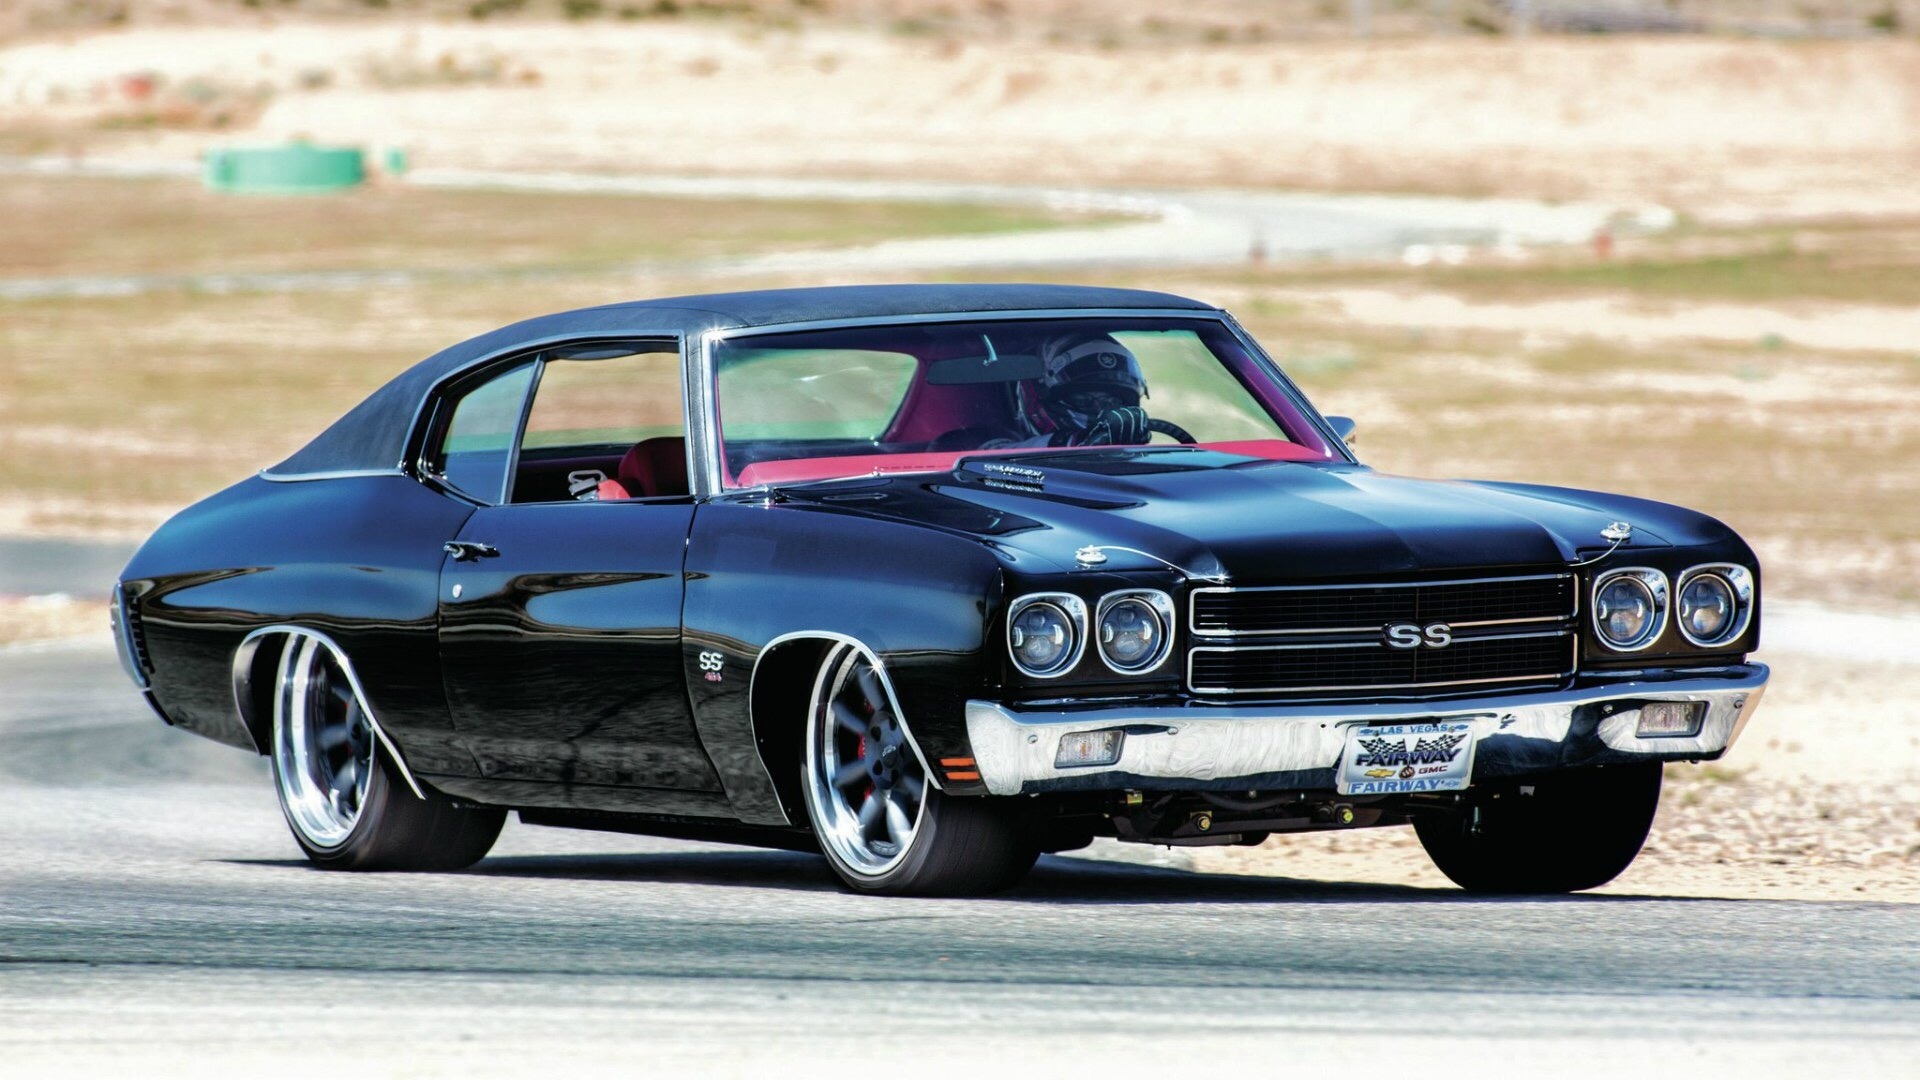 Chevelle SS wallpaper, Chevrolet American muscle, High-resolution auto, Vintage vehicle, Powerful Chevy essence, 1920x1080 Full HD Desktop